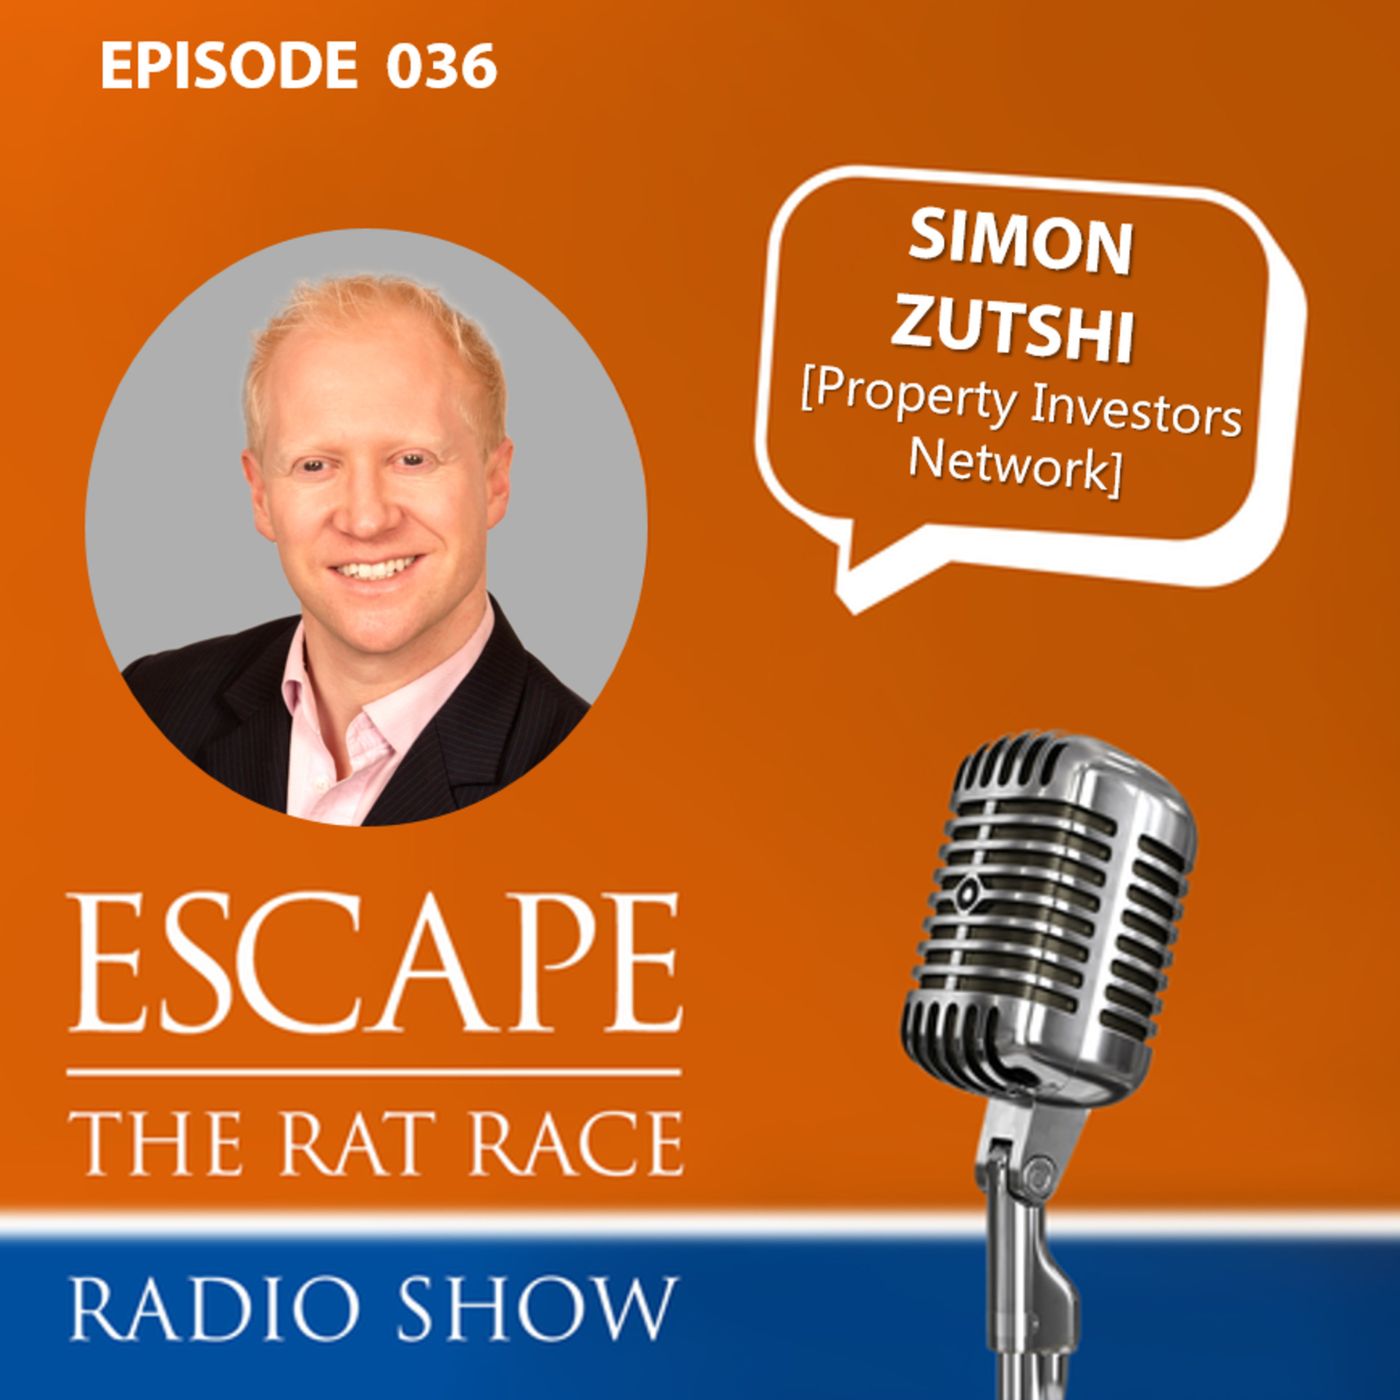 Simon Zutshi - How To Use Property To Escape The Rat Race